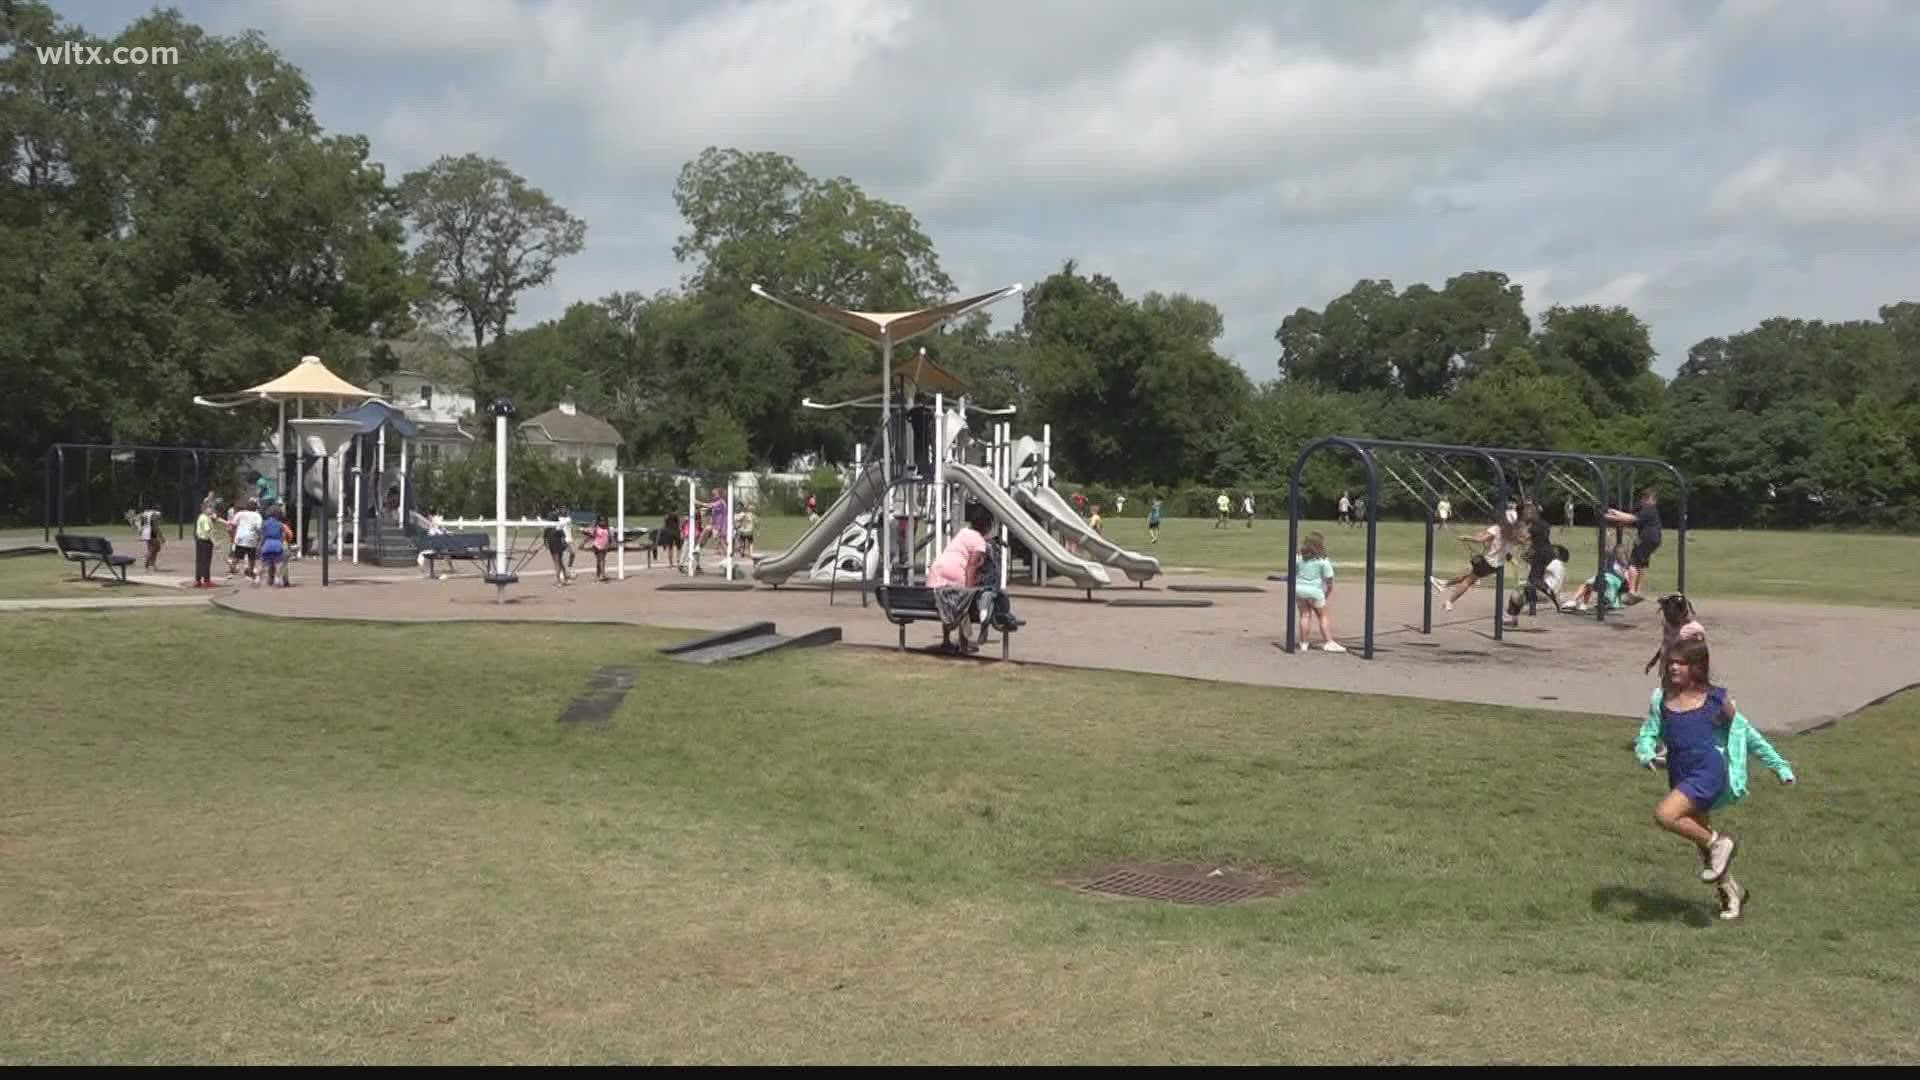 The county is opening up parking lots and playgrounds to get the families to come and play.